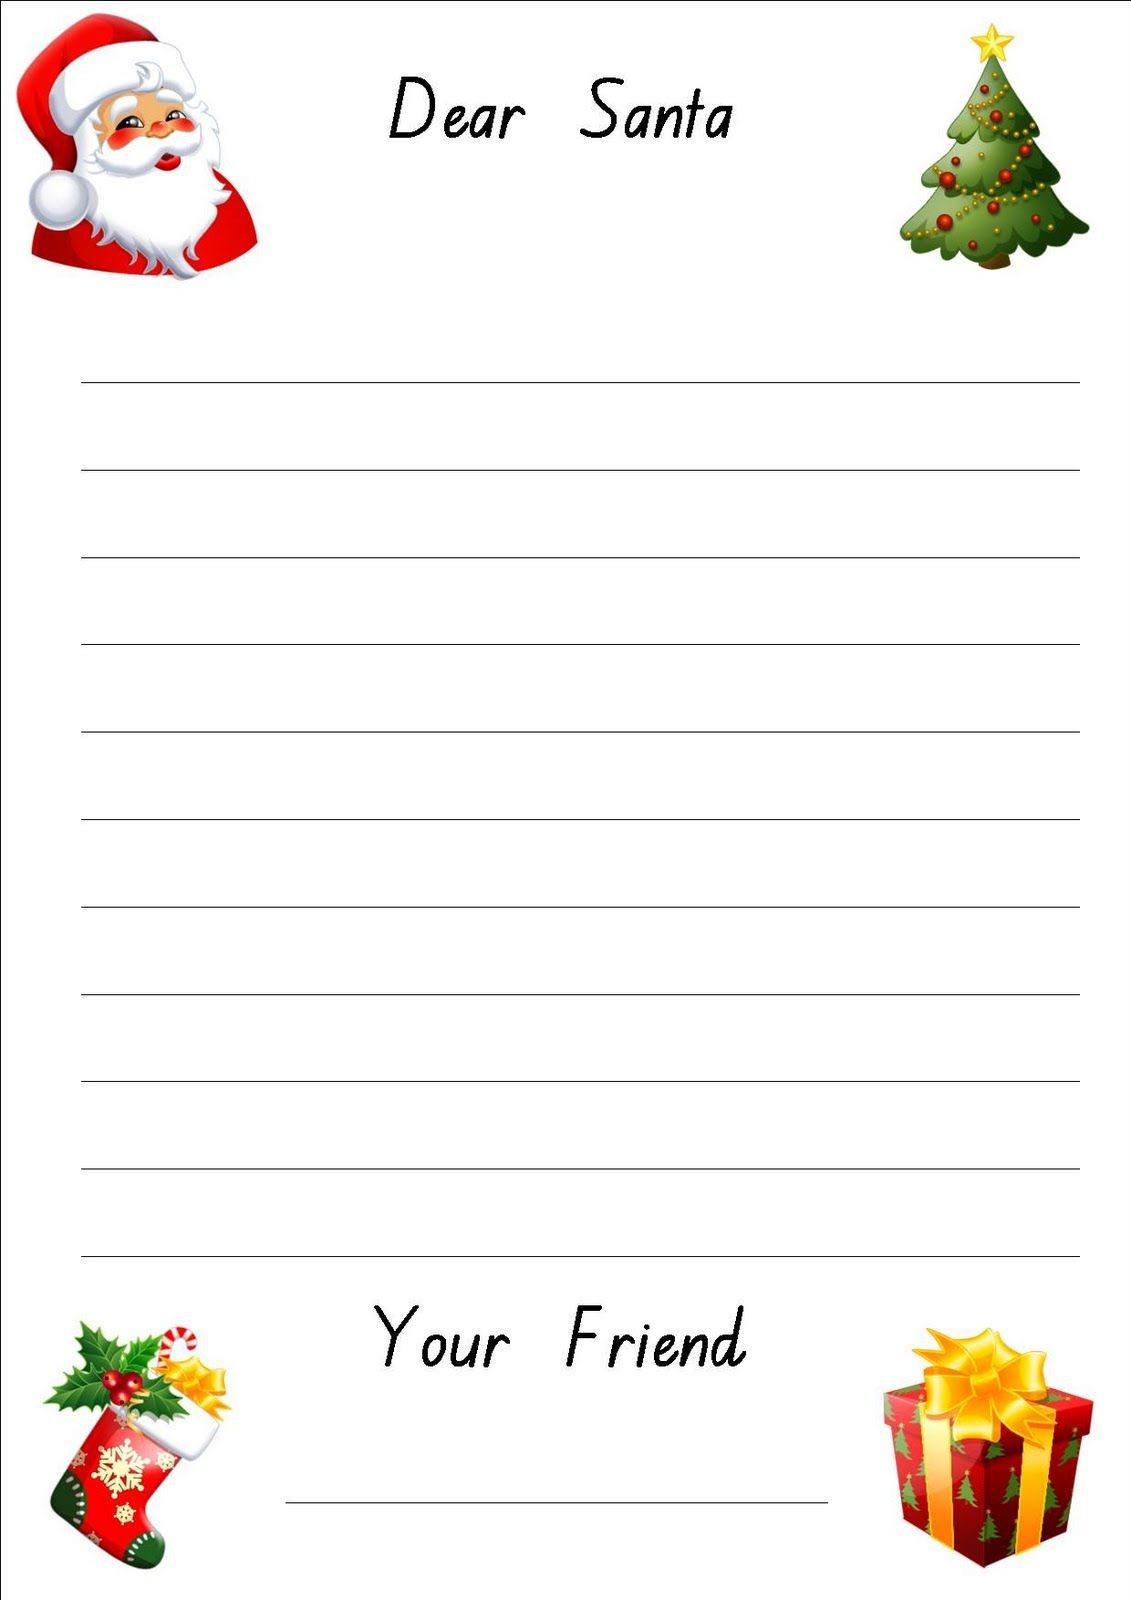 Lined Christmas Paper For Letters | Do Your Kids Write Letters To - Free Printable Christmas Writing Paper With Lines